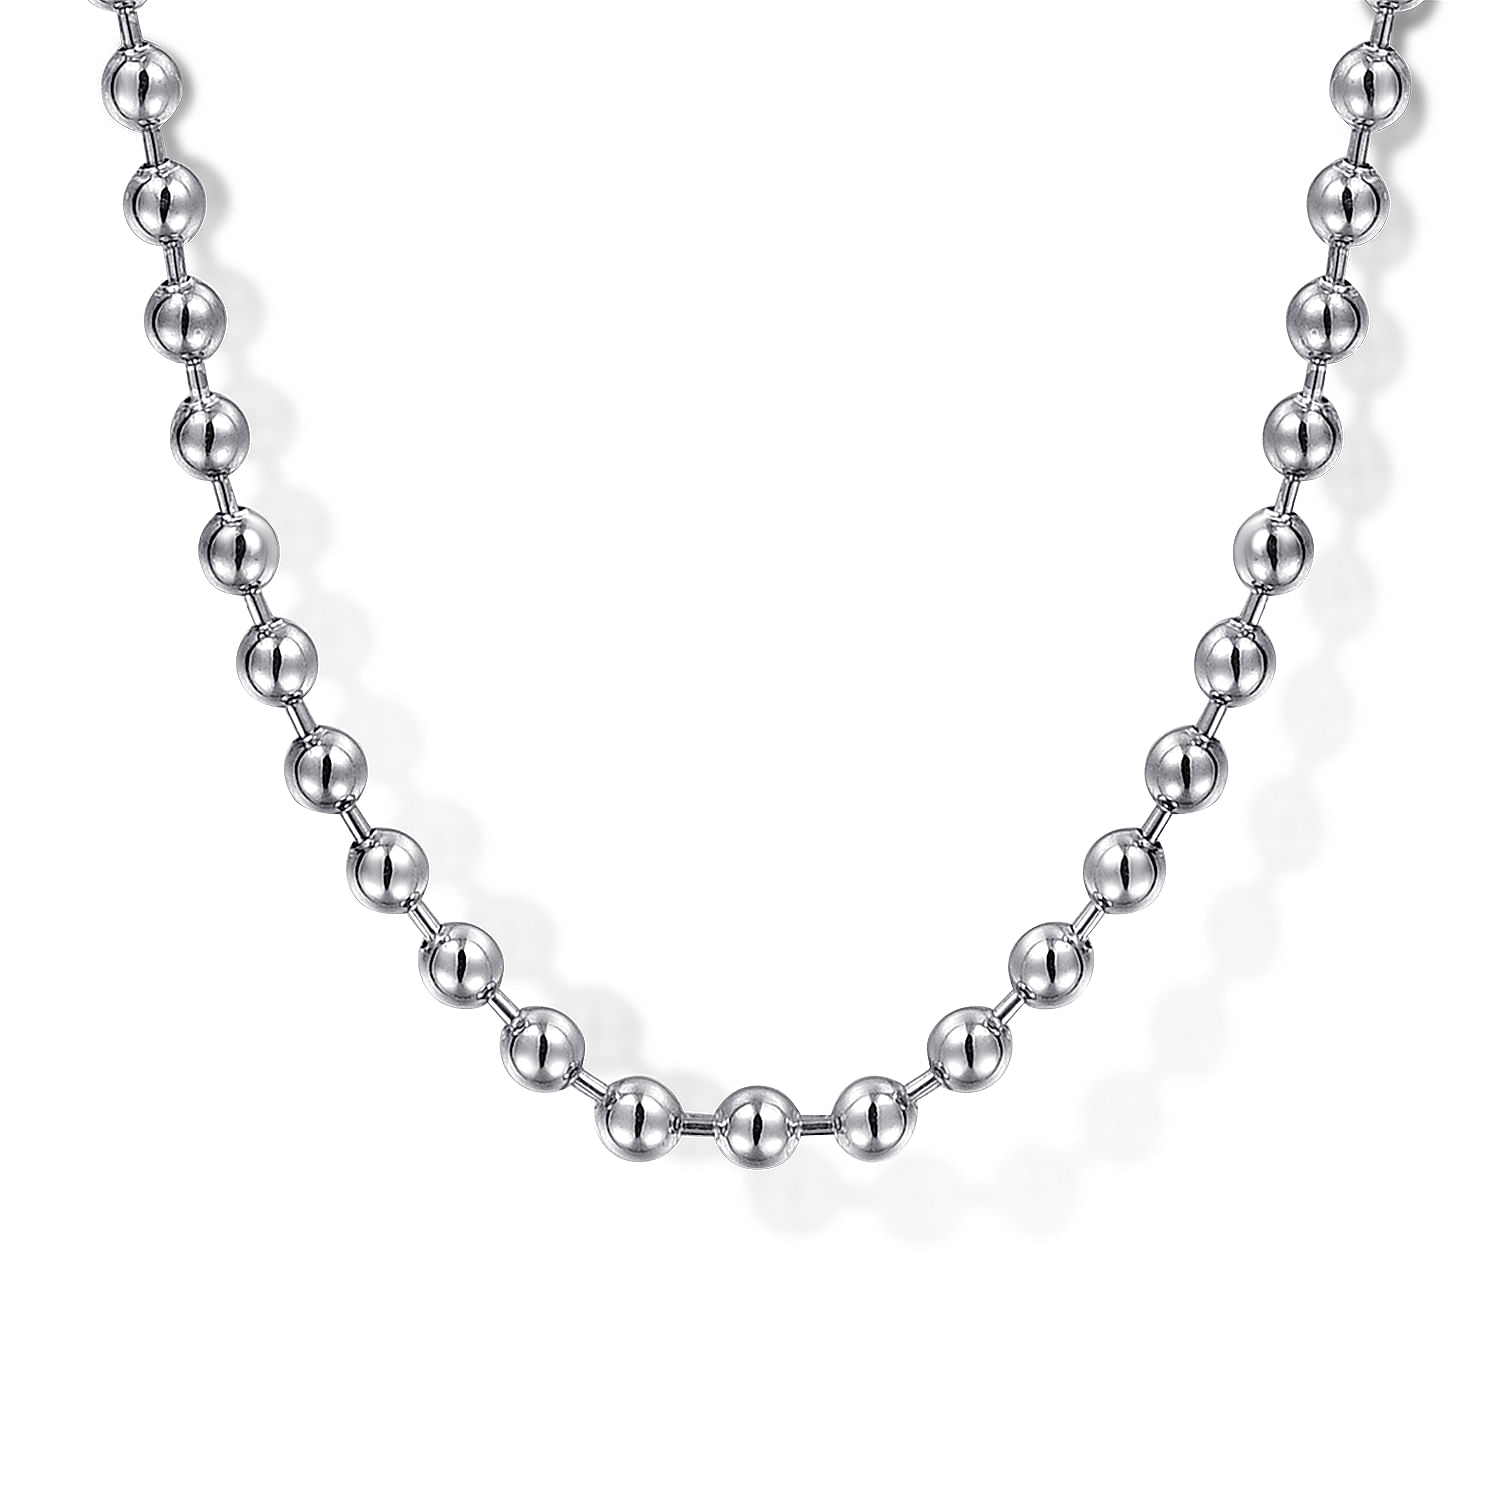 Gabriel - 22 Inch 925 Sterling Silver 3mm Hollow Ball Chain Necklace